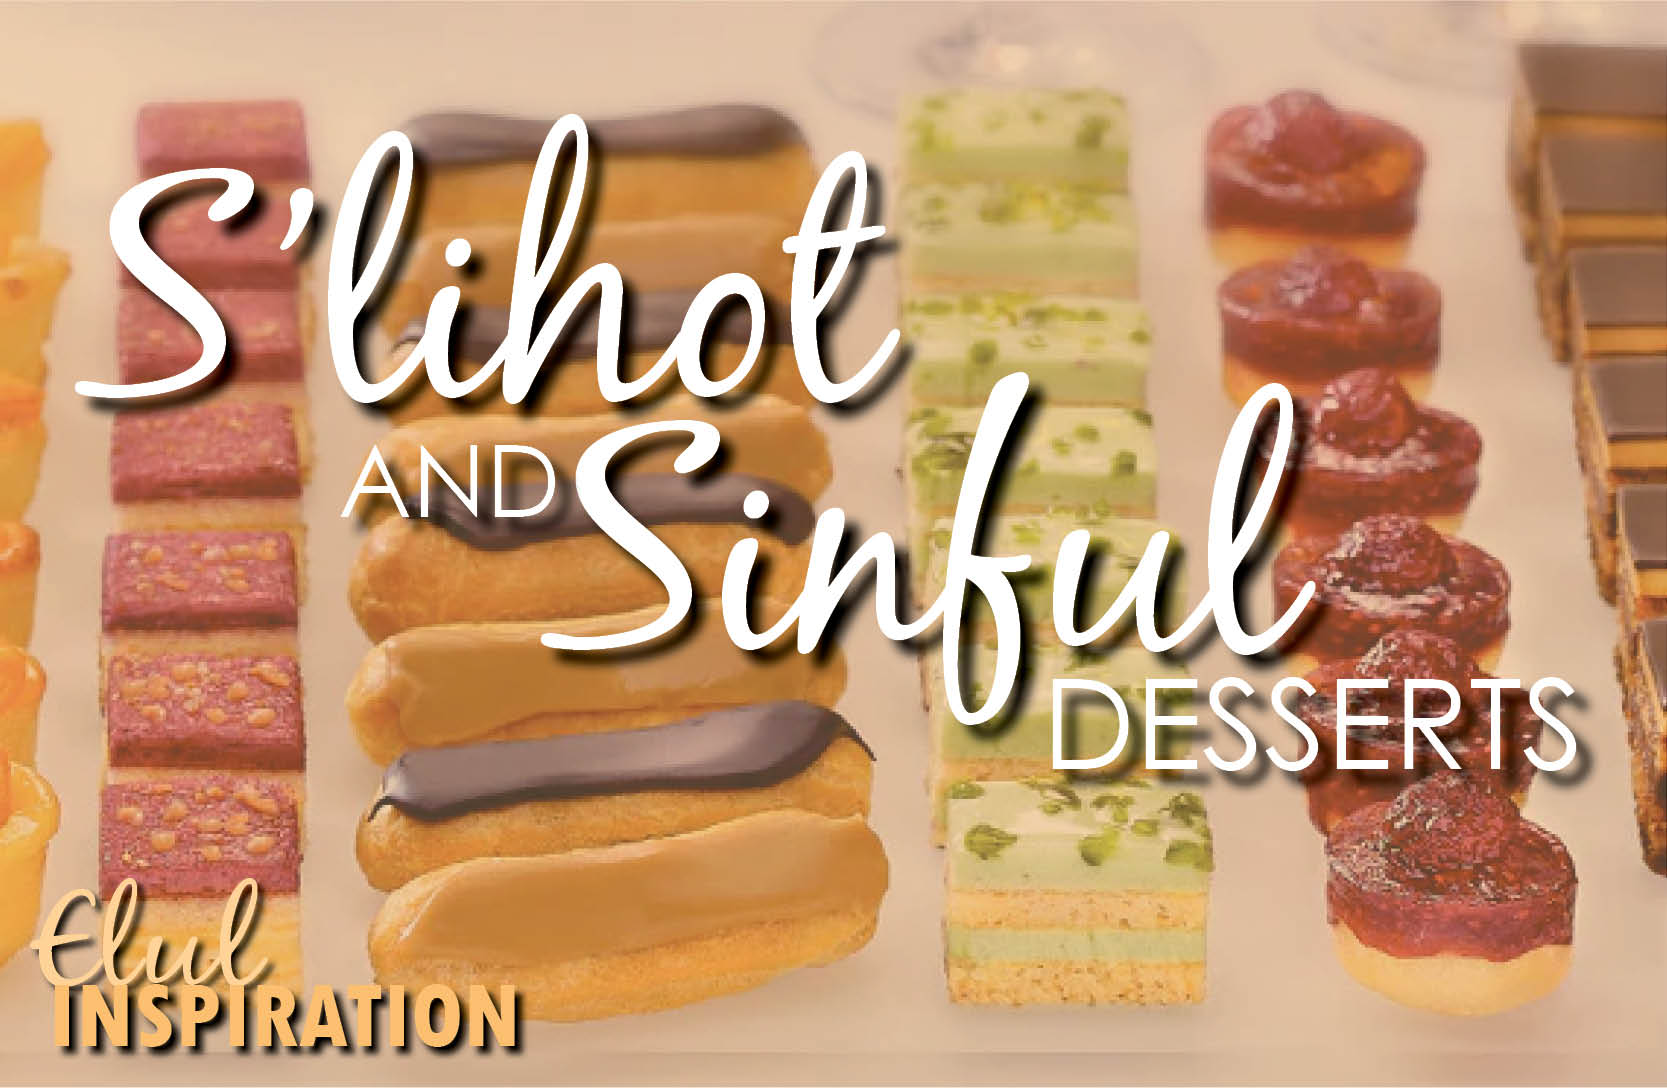 Sinful Desserts and S'lihot